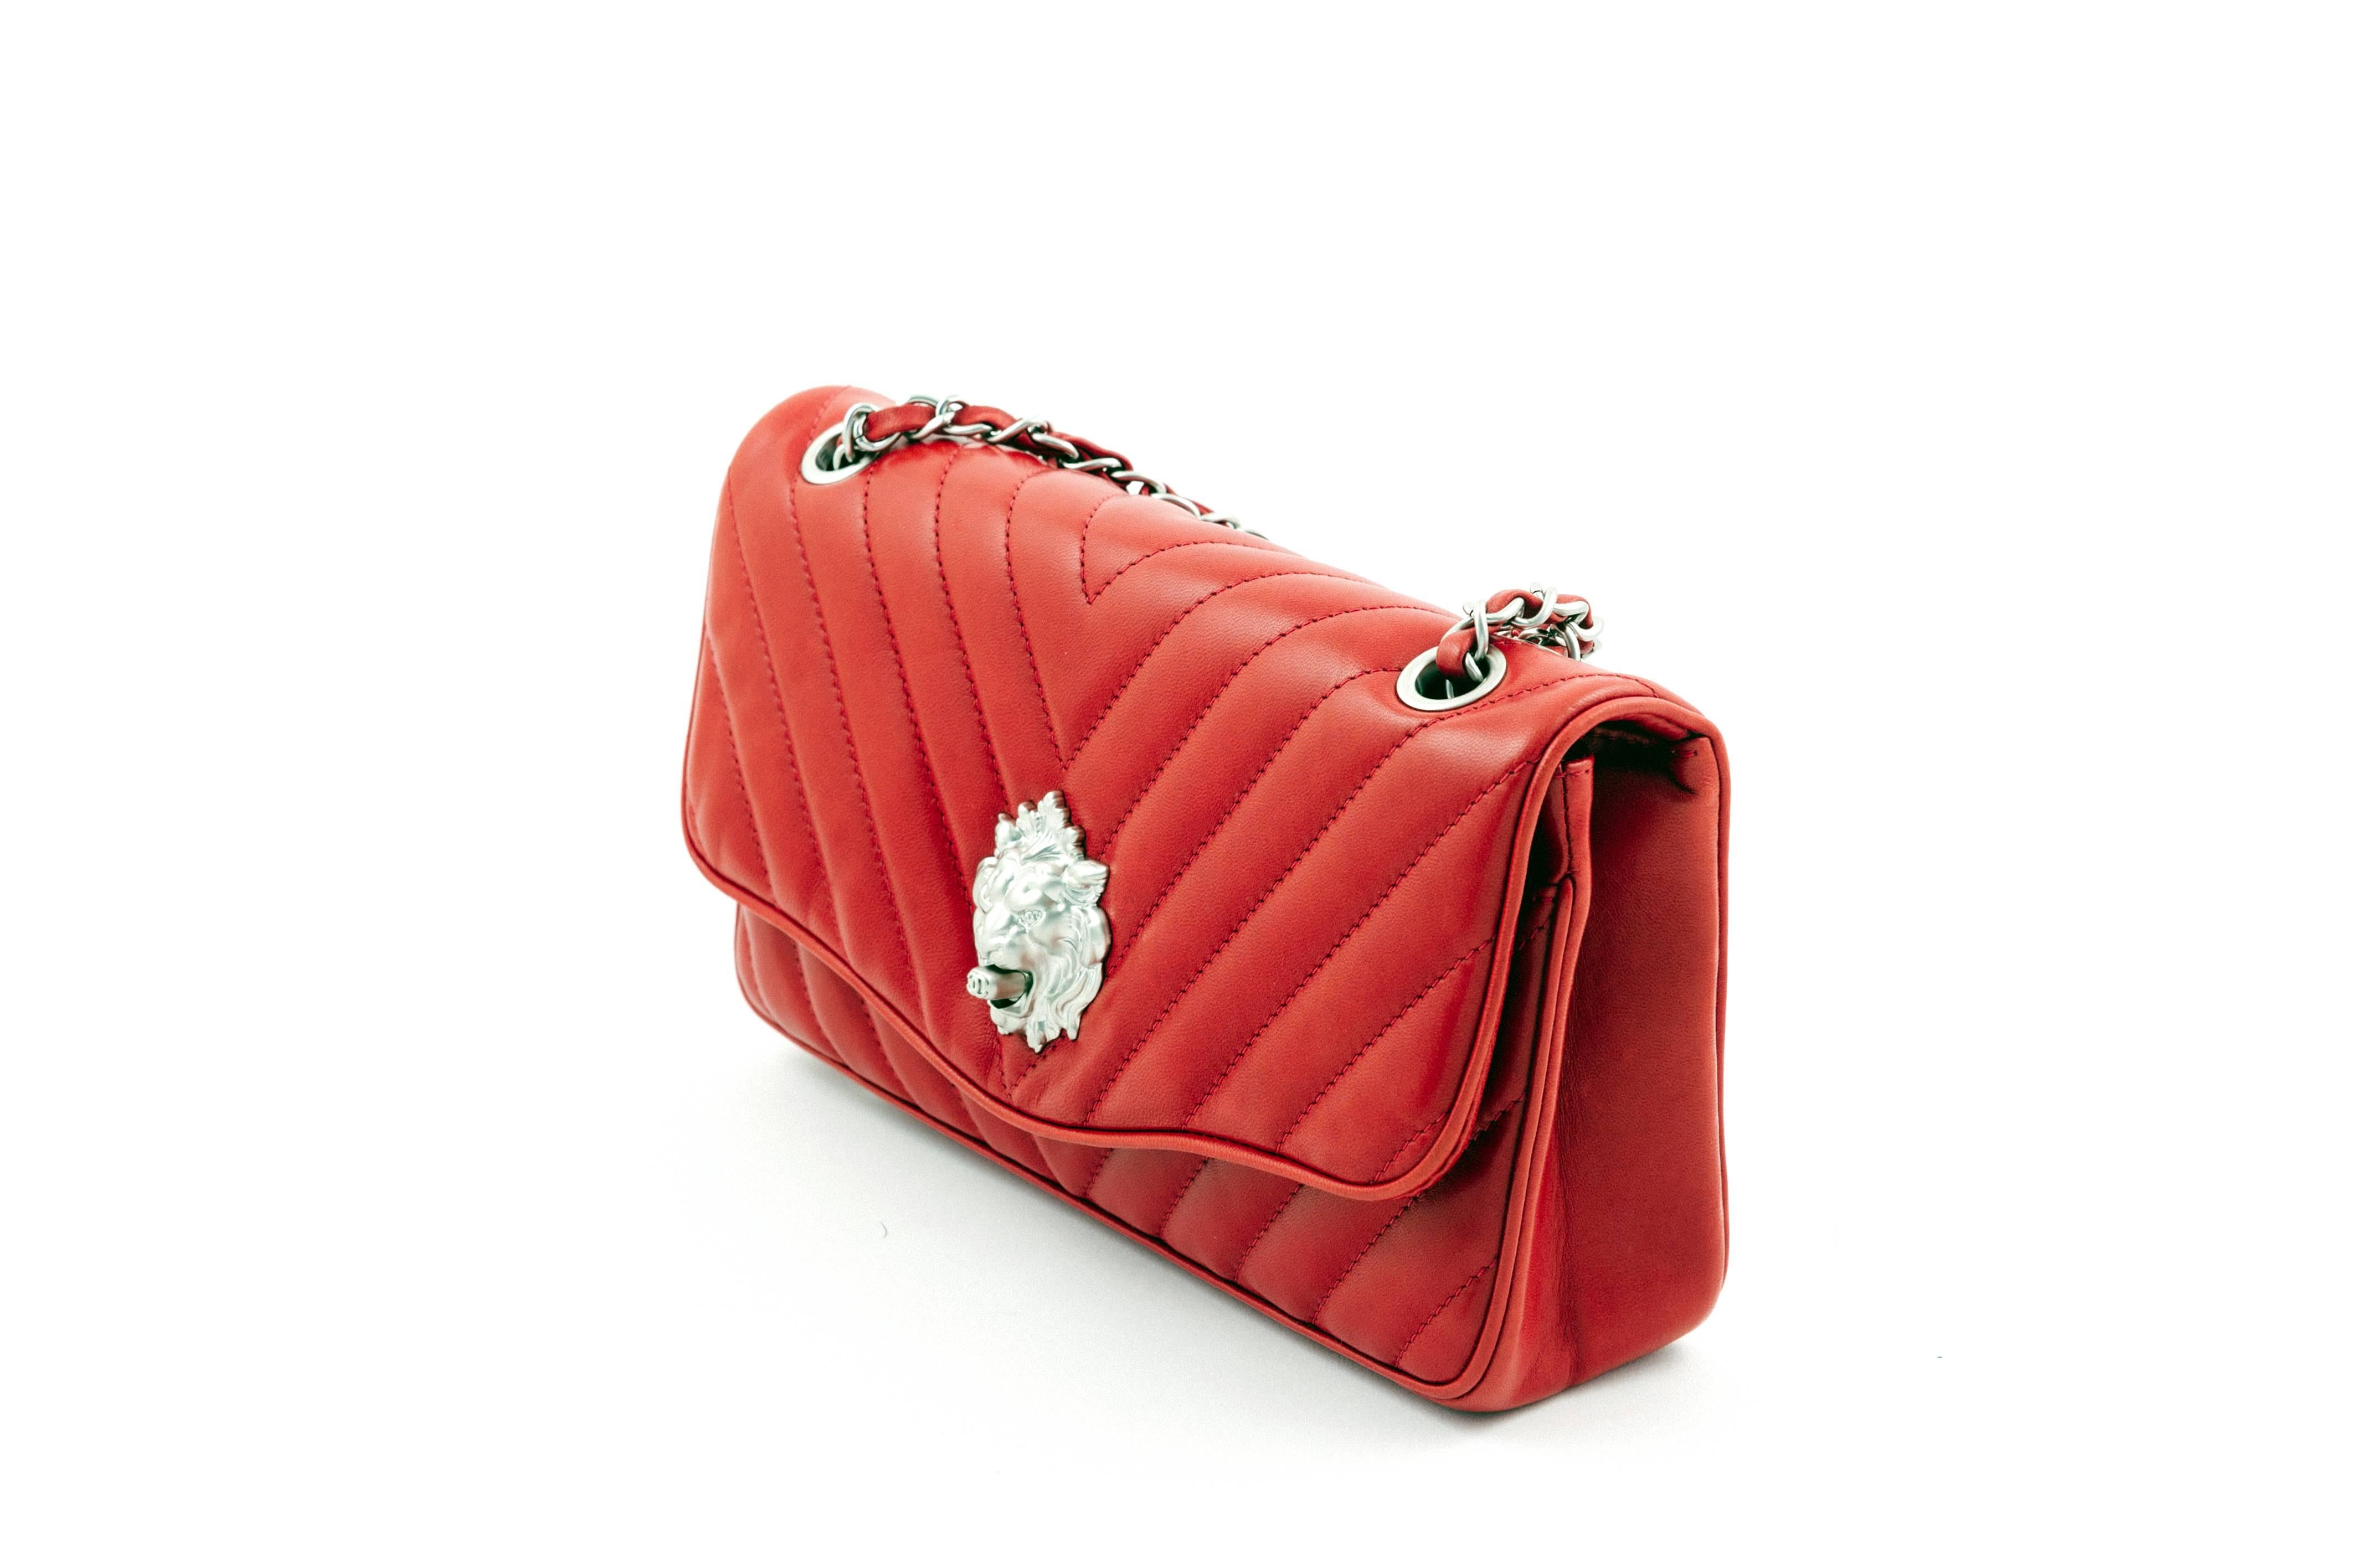 Chanel Red Leather Bag 1